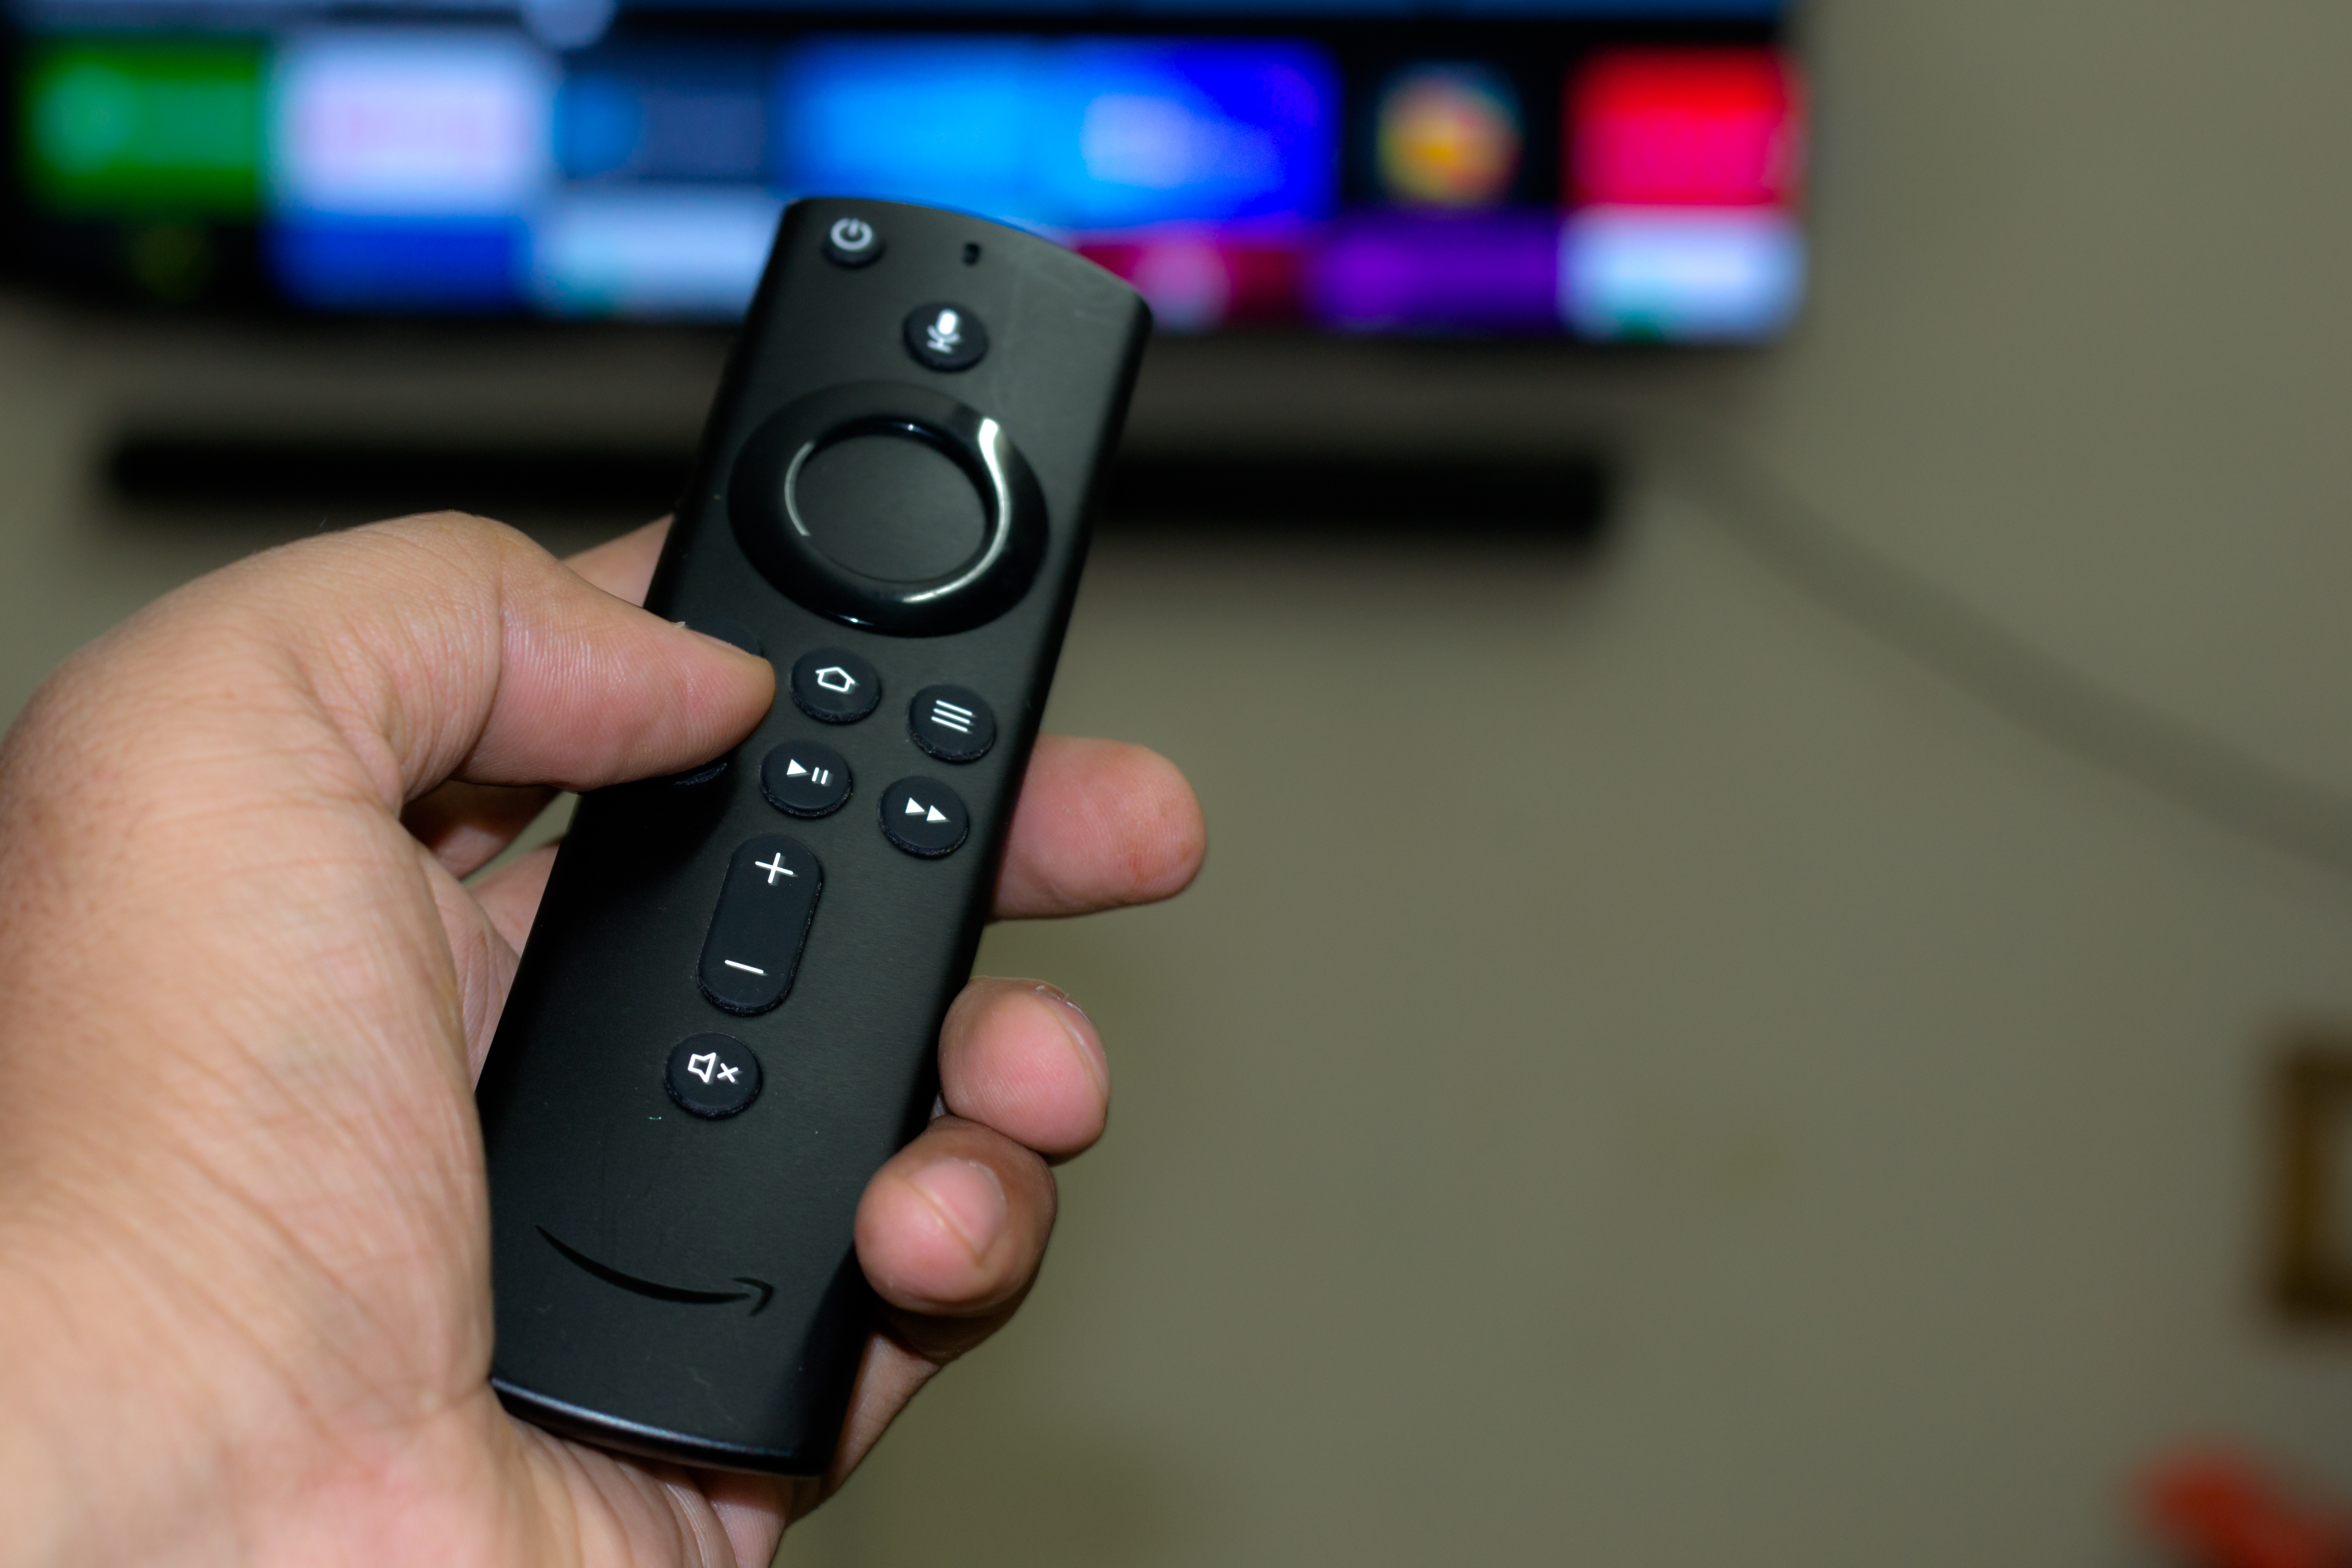 Many people are snubbing costly subscriptions for a 'dodgy Fire TV stick